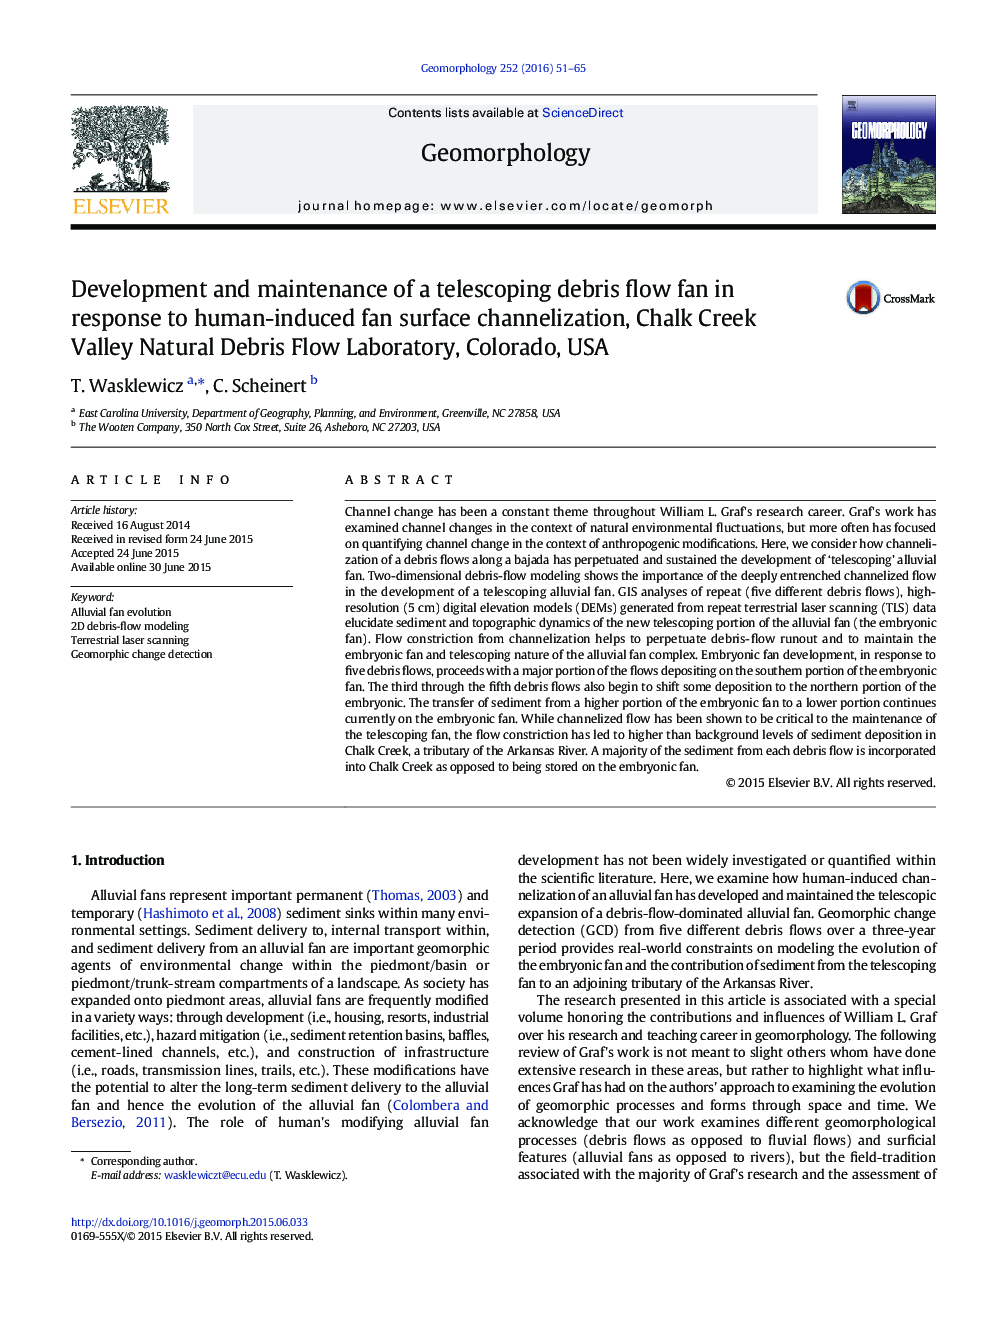 Development and maintenance of a telescoping debris flow fan in response to human-induced fan surface channelization, Chalk Creek Valley Natural Debris Flow Laboratory, Colorado, USA